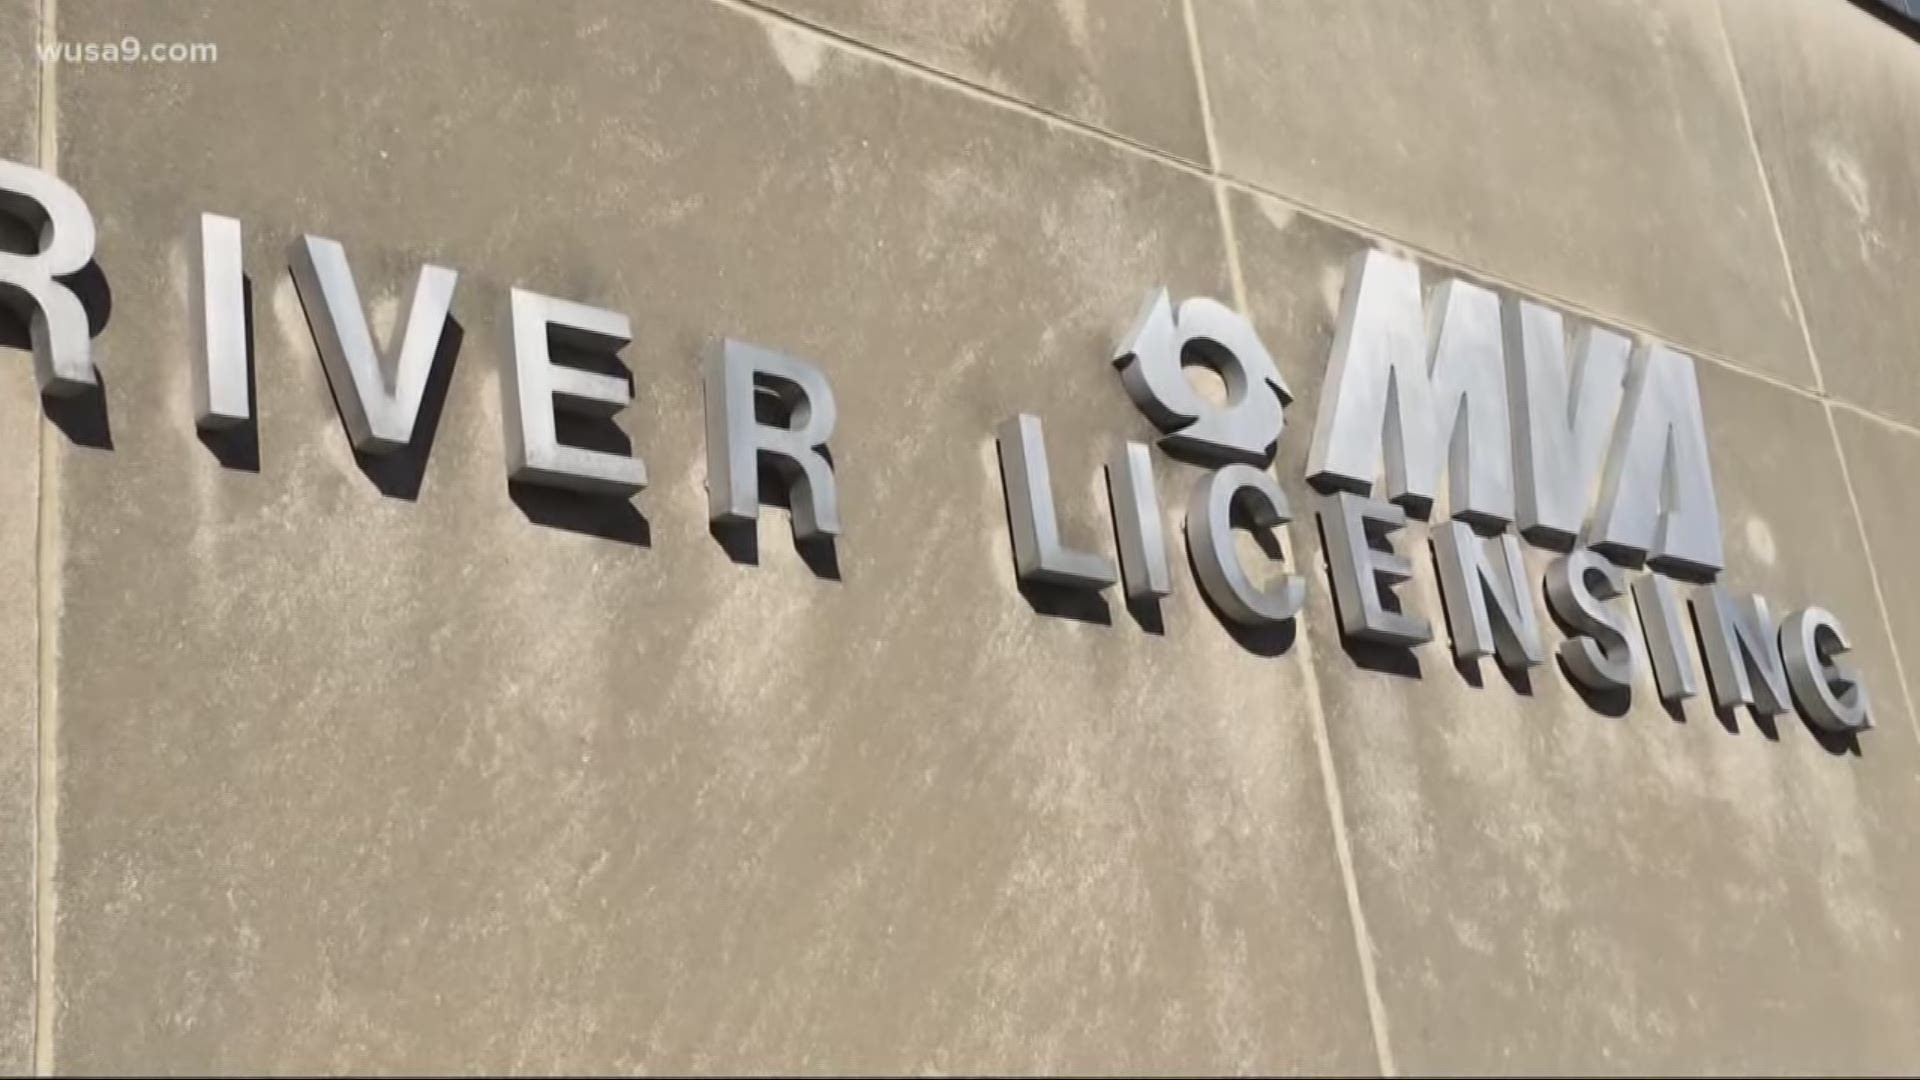 On Friday at MVA headquarters in Glen Burnie, Md., people with appointments said they waited more than four hours to renew their driver's license.